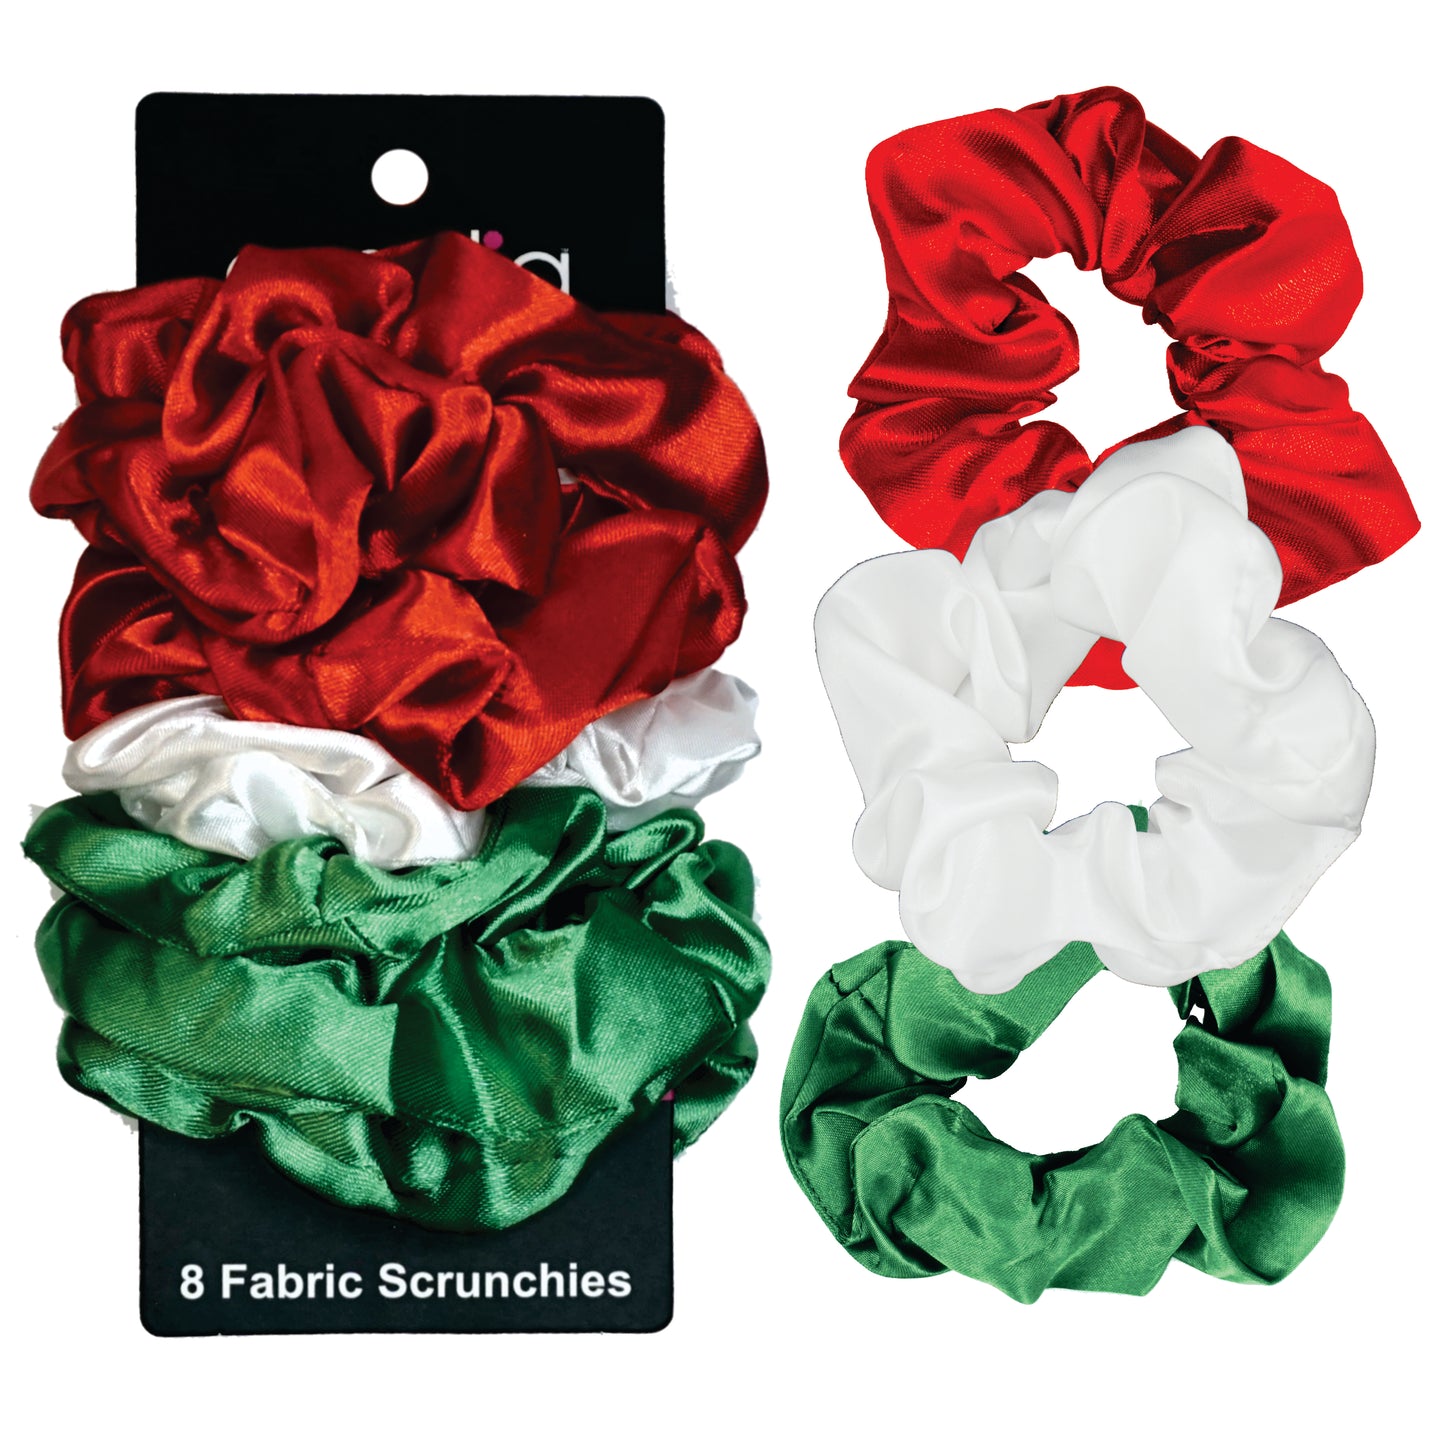 Amelia Beauty Products, Red, White and Green Satin Scrunchies, 3.5in Diameter, Gentle on Hair, Strong Hold, No Snag, No Dents or Creases. 8 Pack